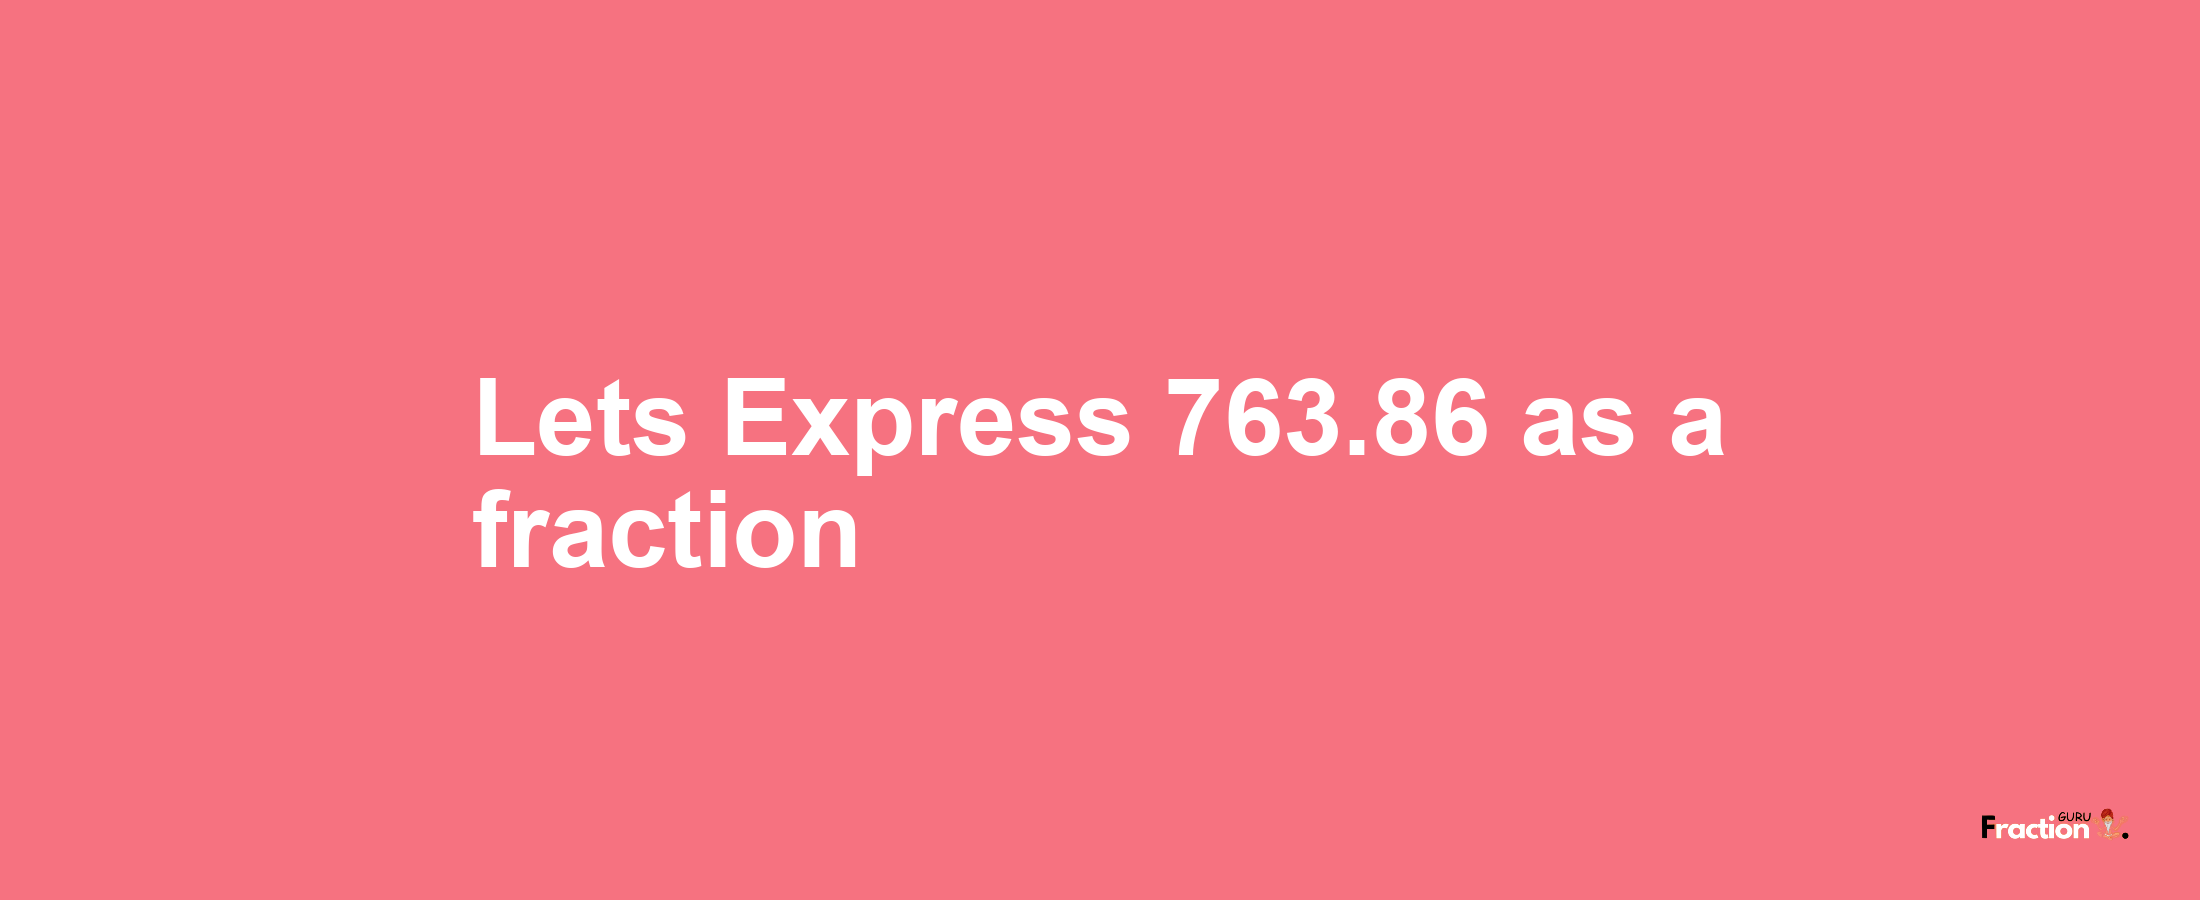 Lets Express 763.86 as afraction